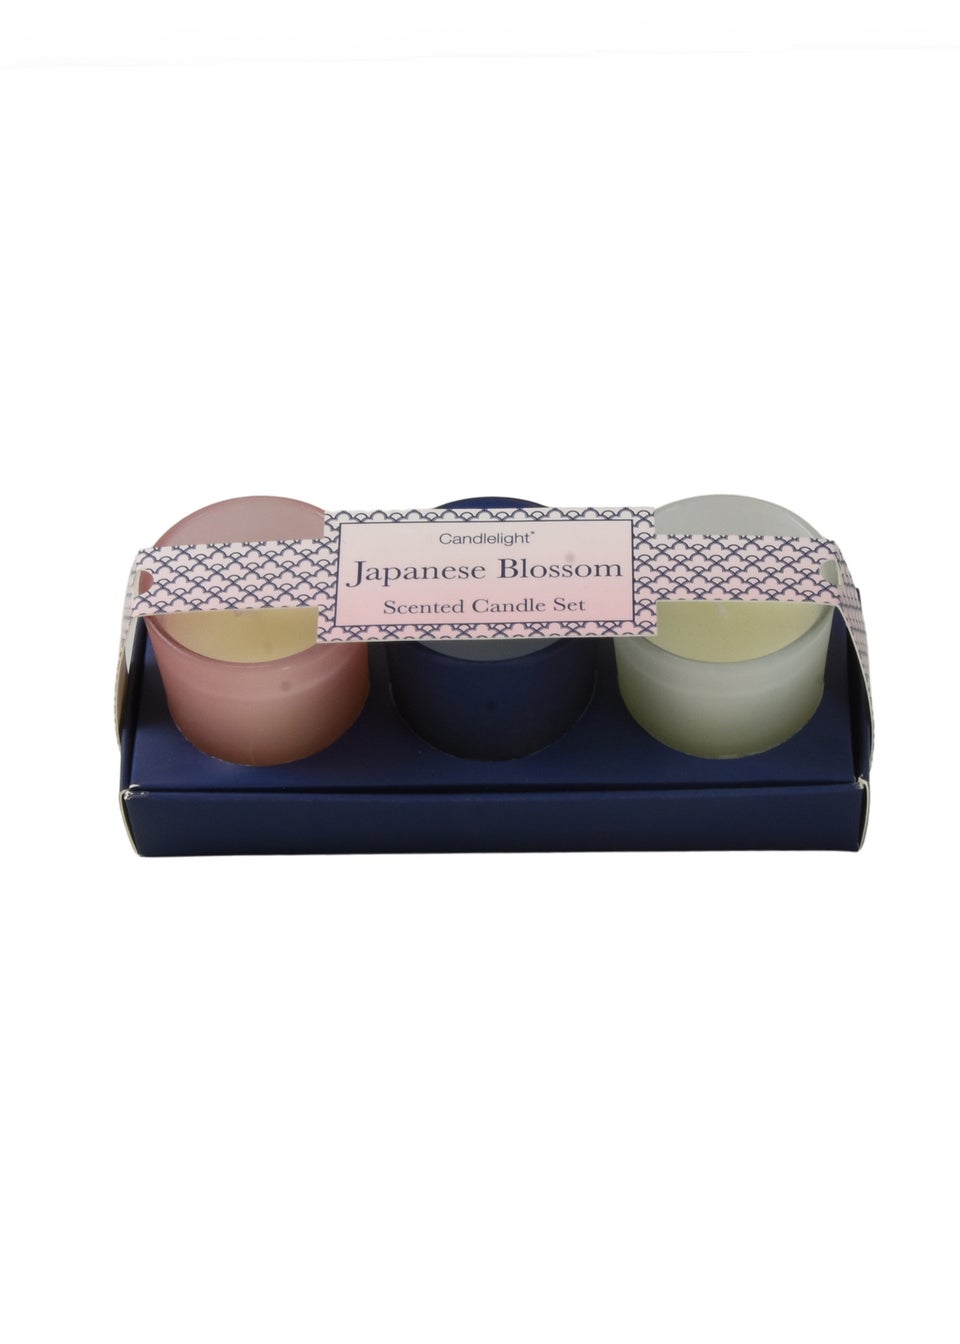 Candlelight 3 Pack Japanese Blossom Scented Candle Set